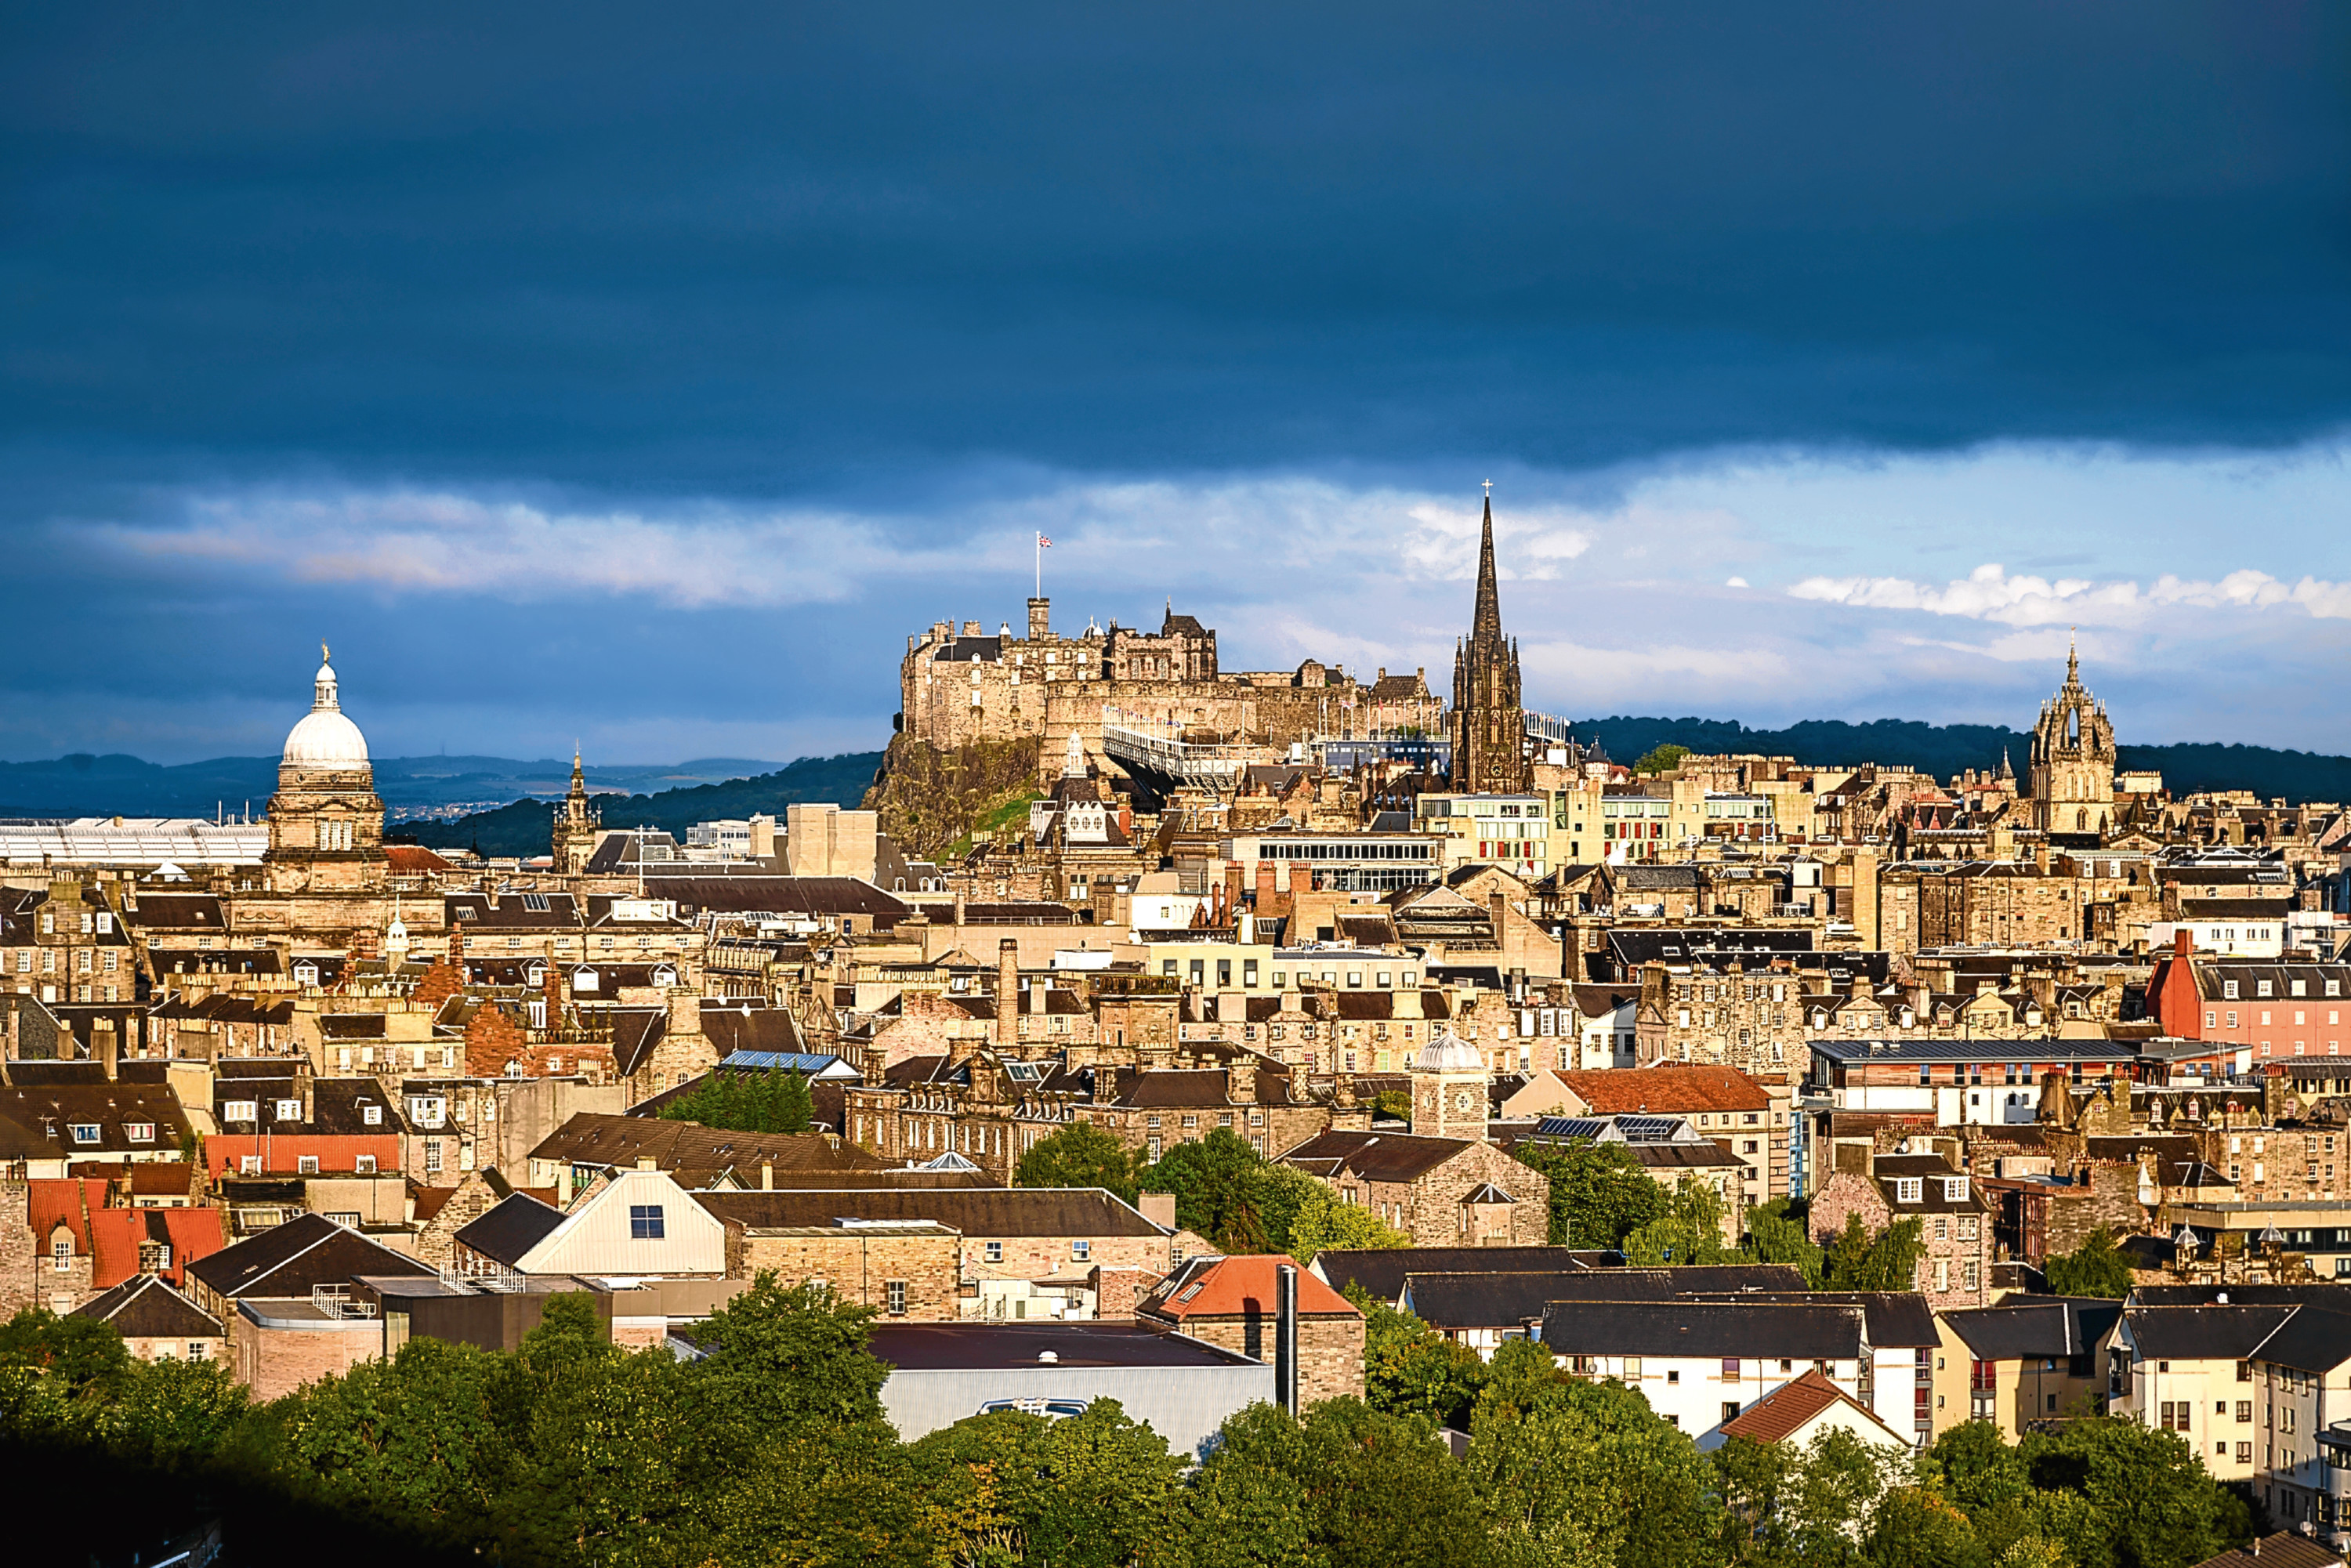 Fife is part of the wider deal that includes Edinburgh.